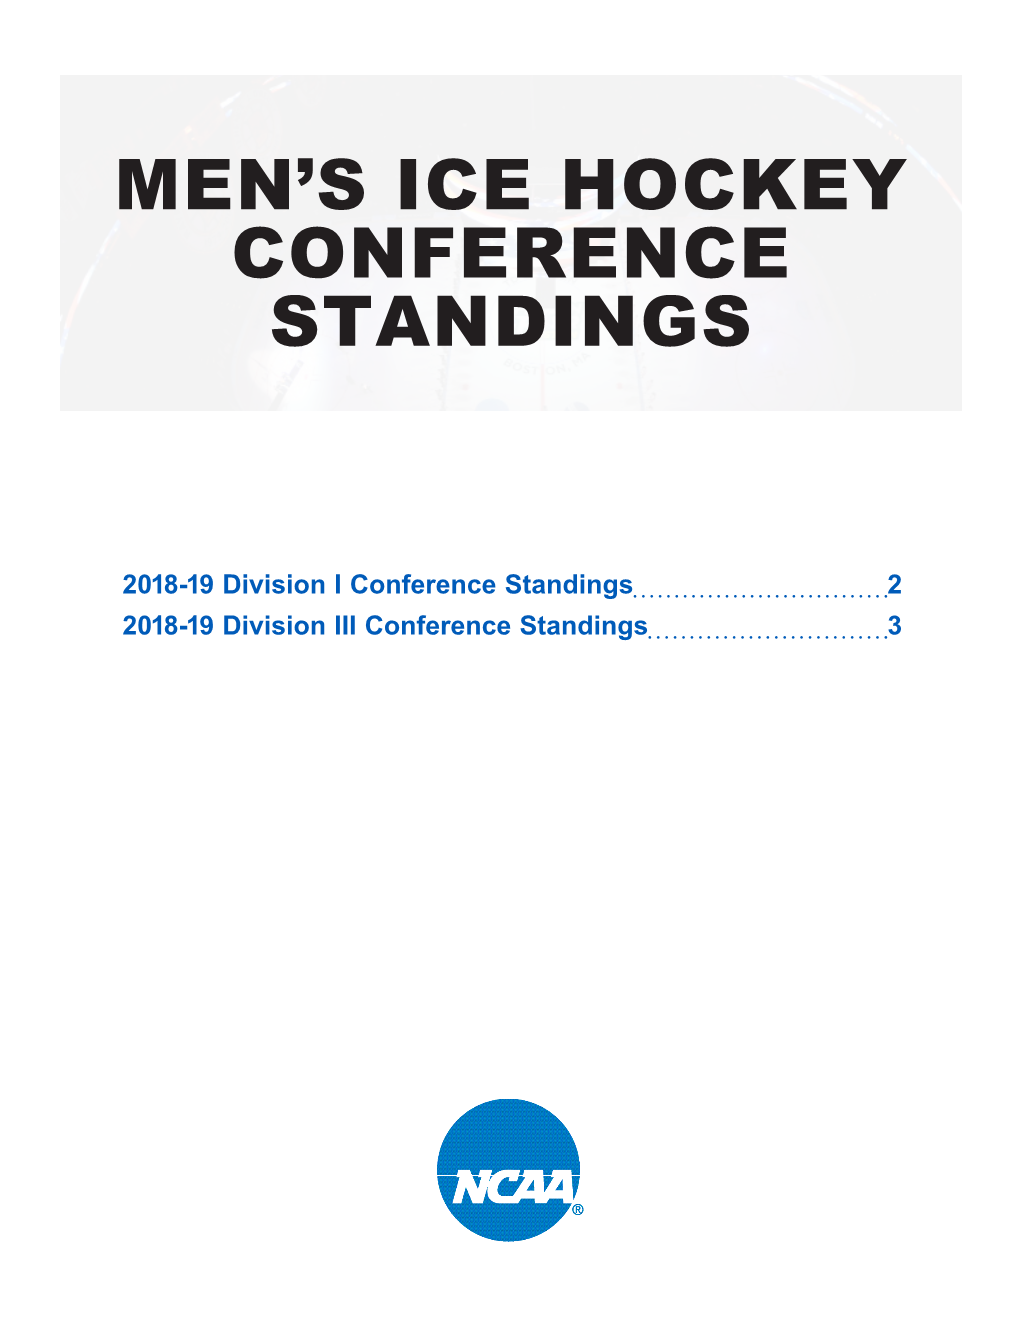 Men's Ice Hockey Conference Standings